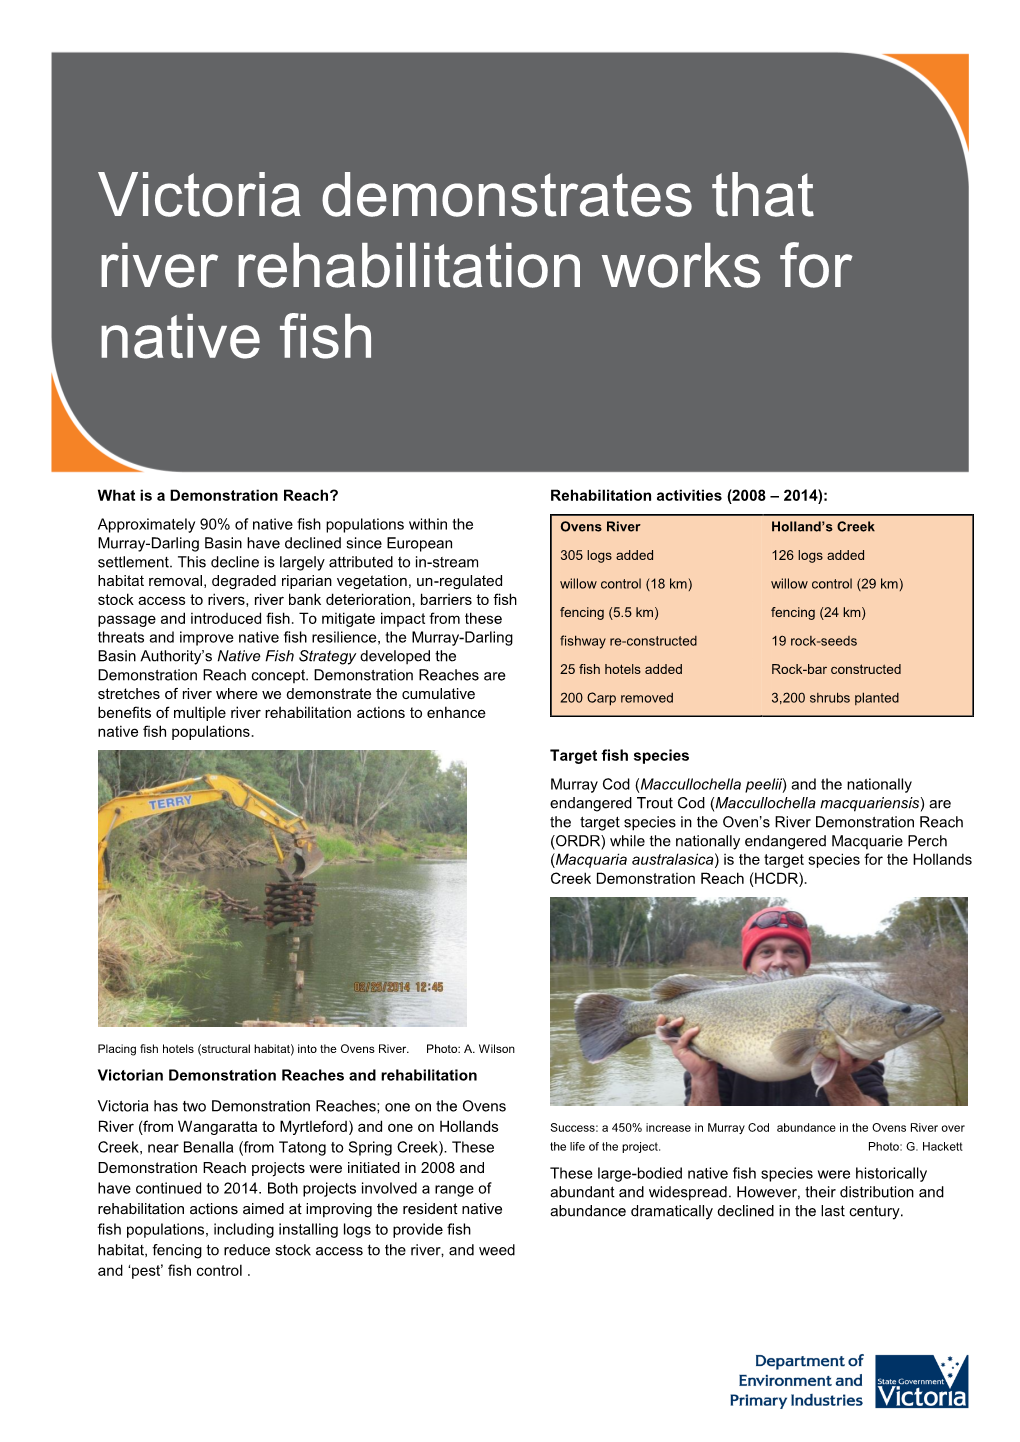 Victoria Demonstrates That River Rehabilitation Works for Native Fish